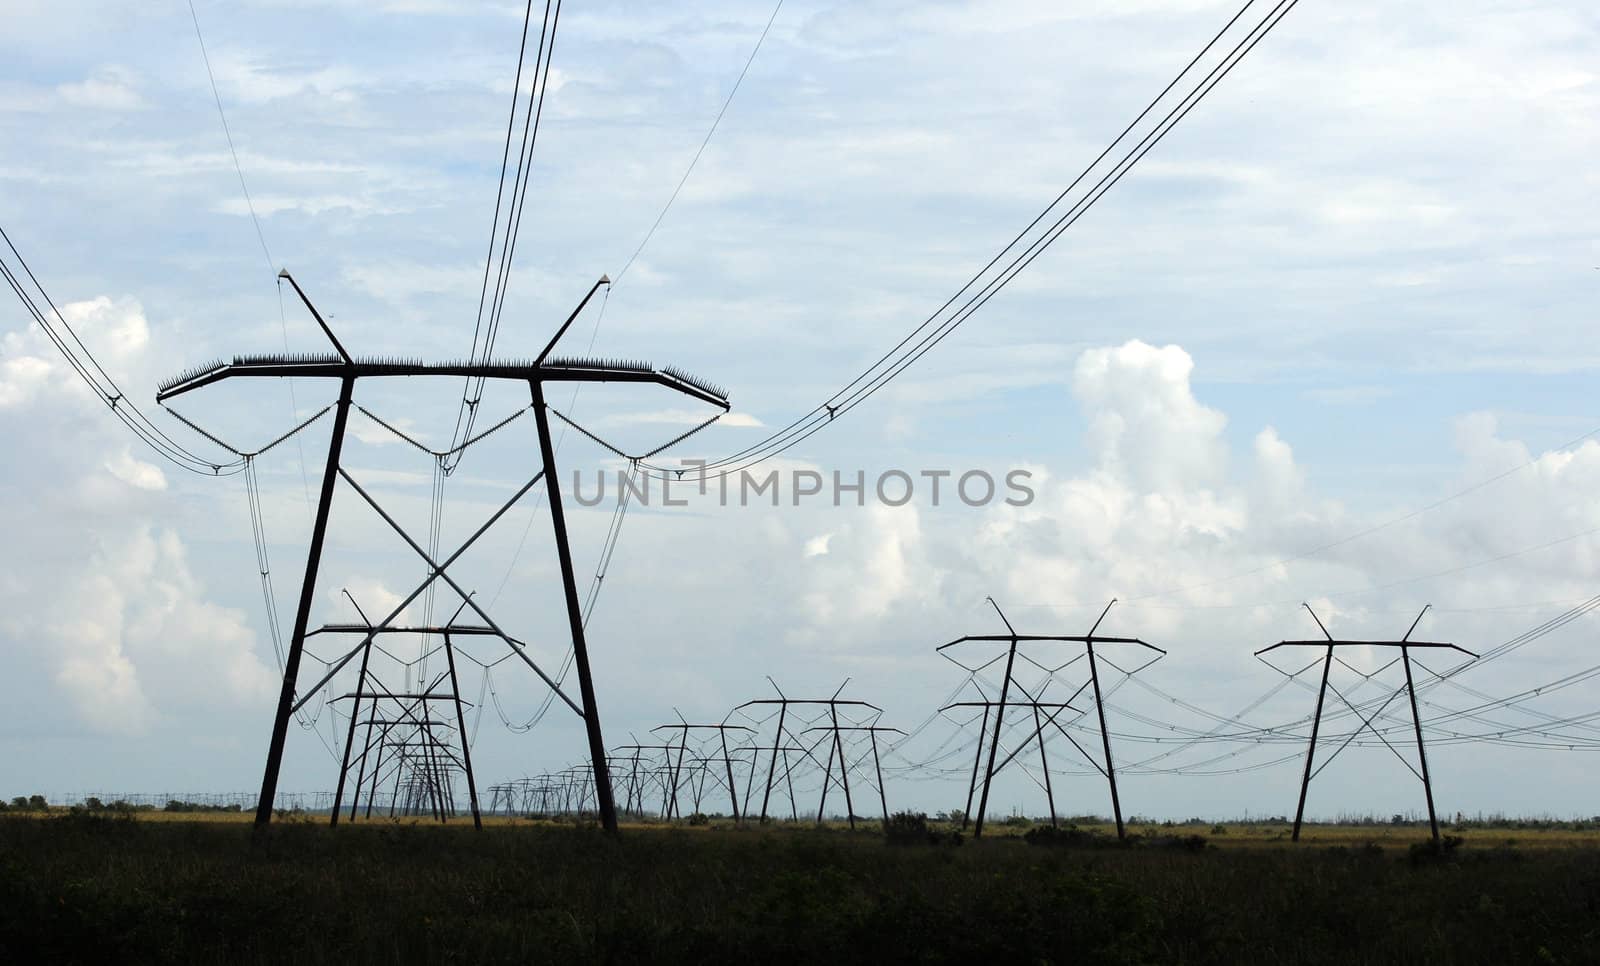 Electric power lines for the electric industry